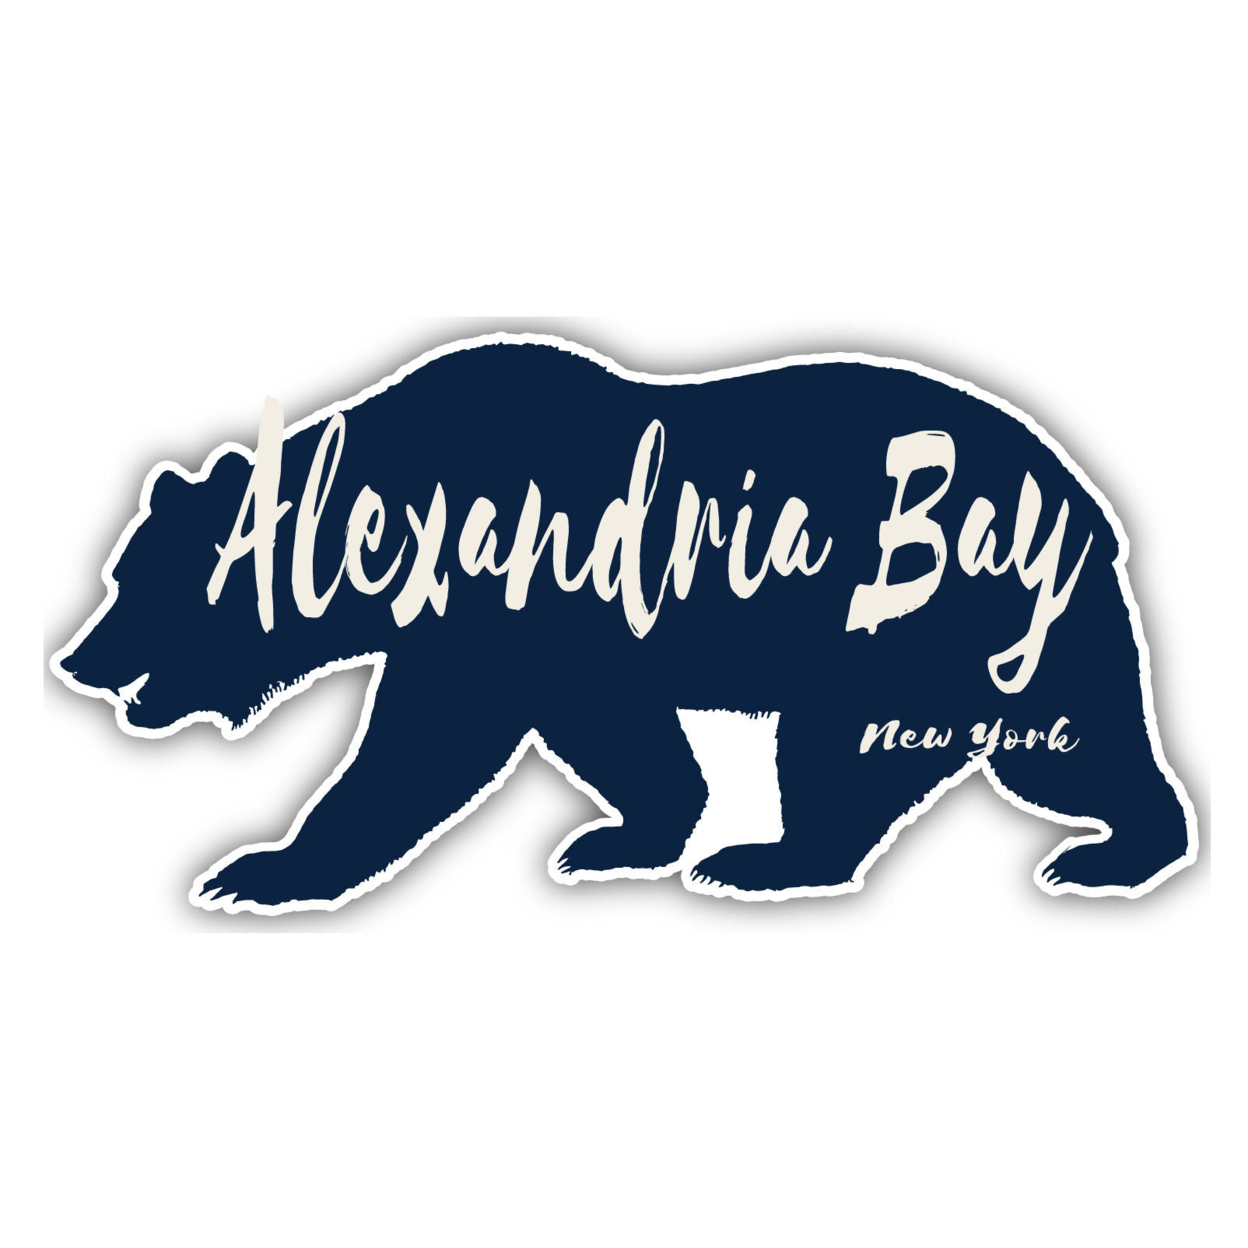 Alexandria Bay New York Souvenir Decorative Stickers (Choose Theme And Size) - 4-Pack, 8-Inch, Adventures Awaits